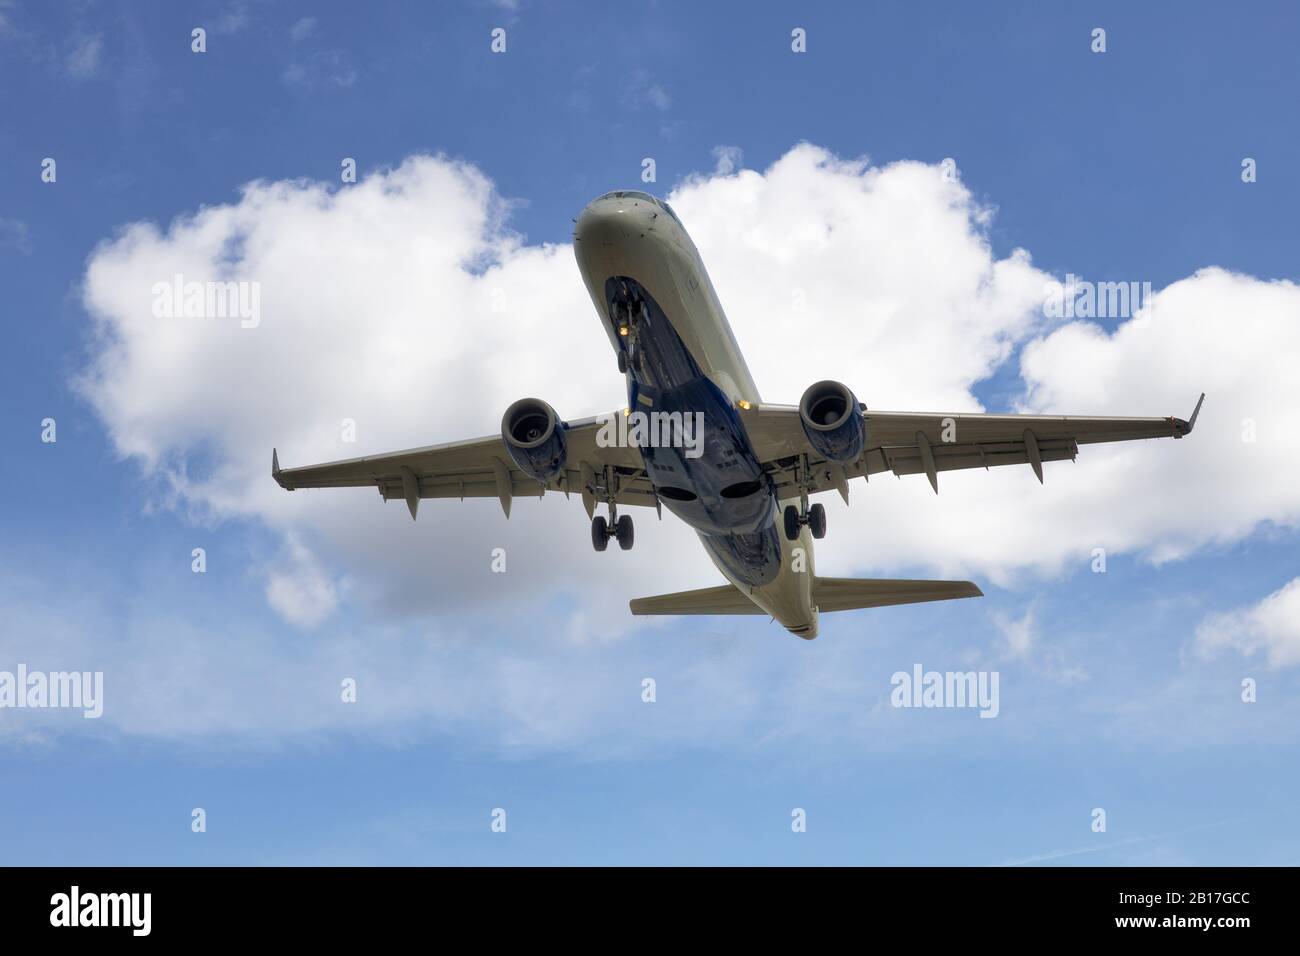 Air Canada Embraer E190 landing at YVR Stock Photo - Alamy